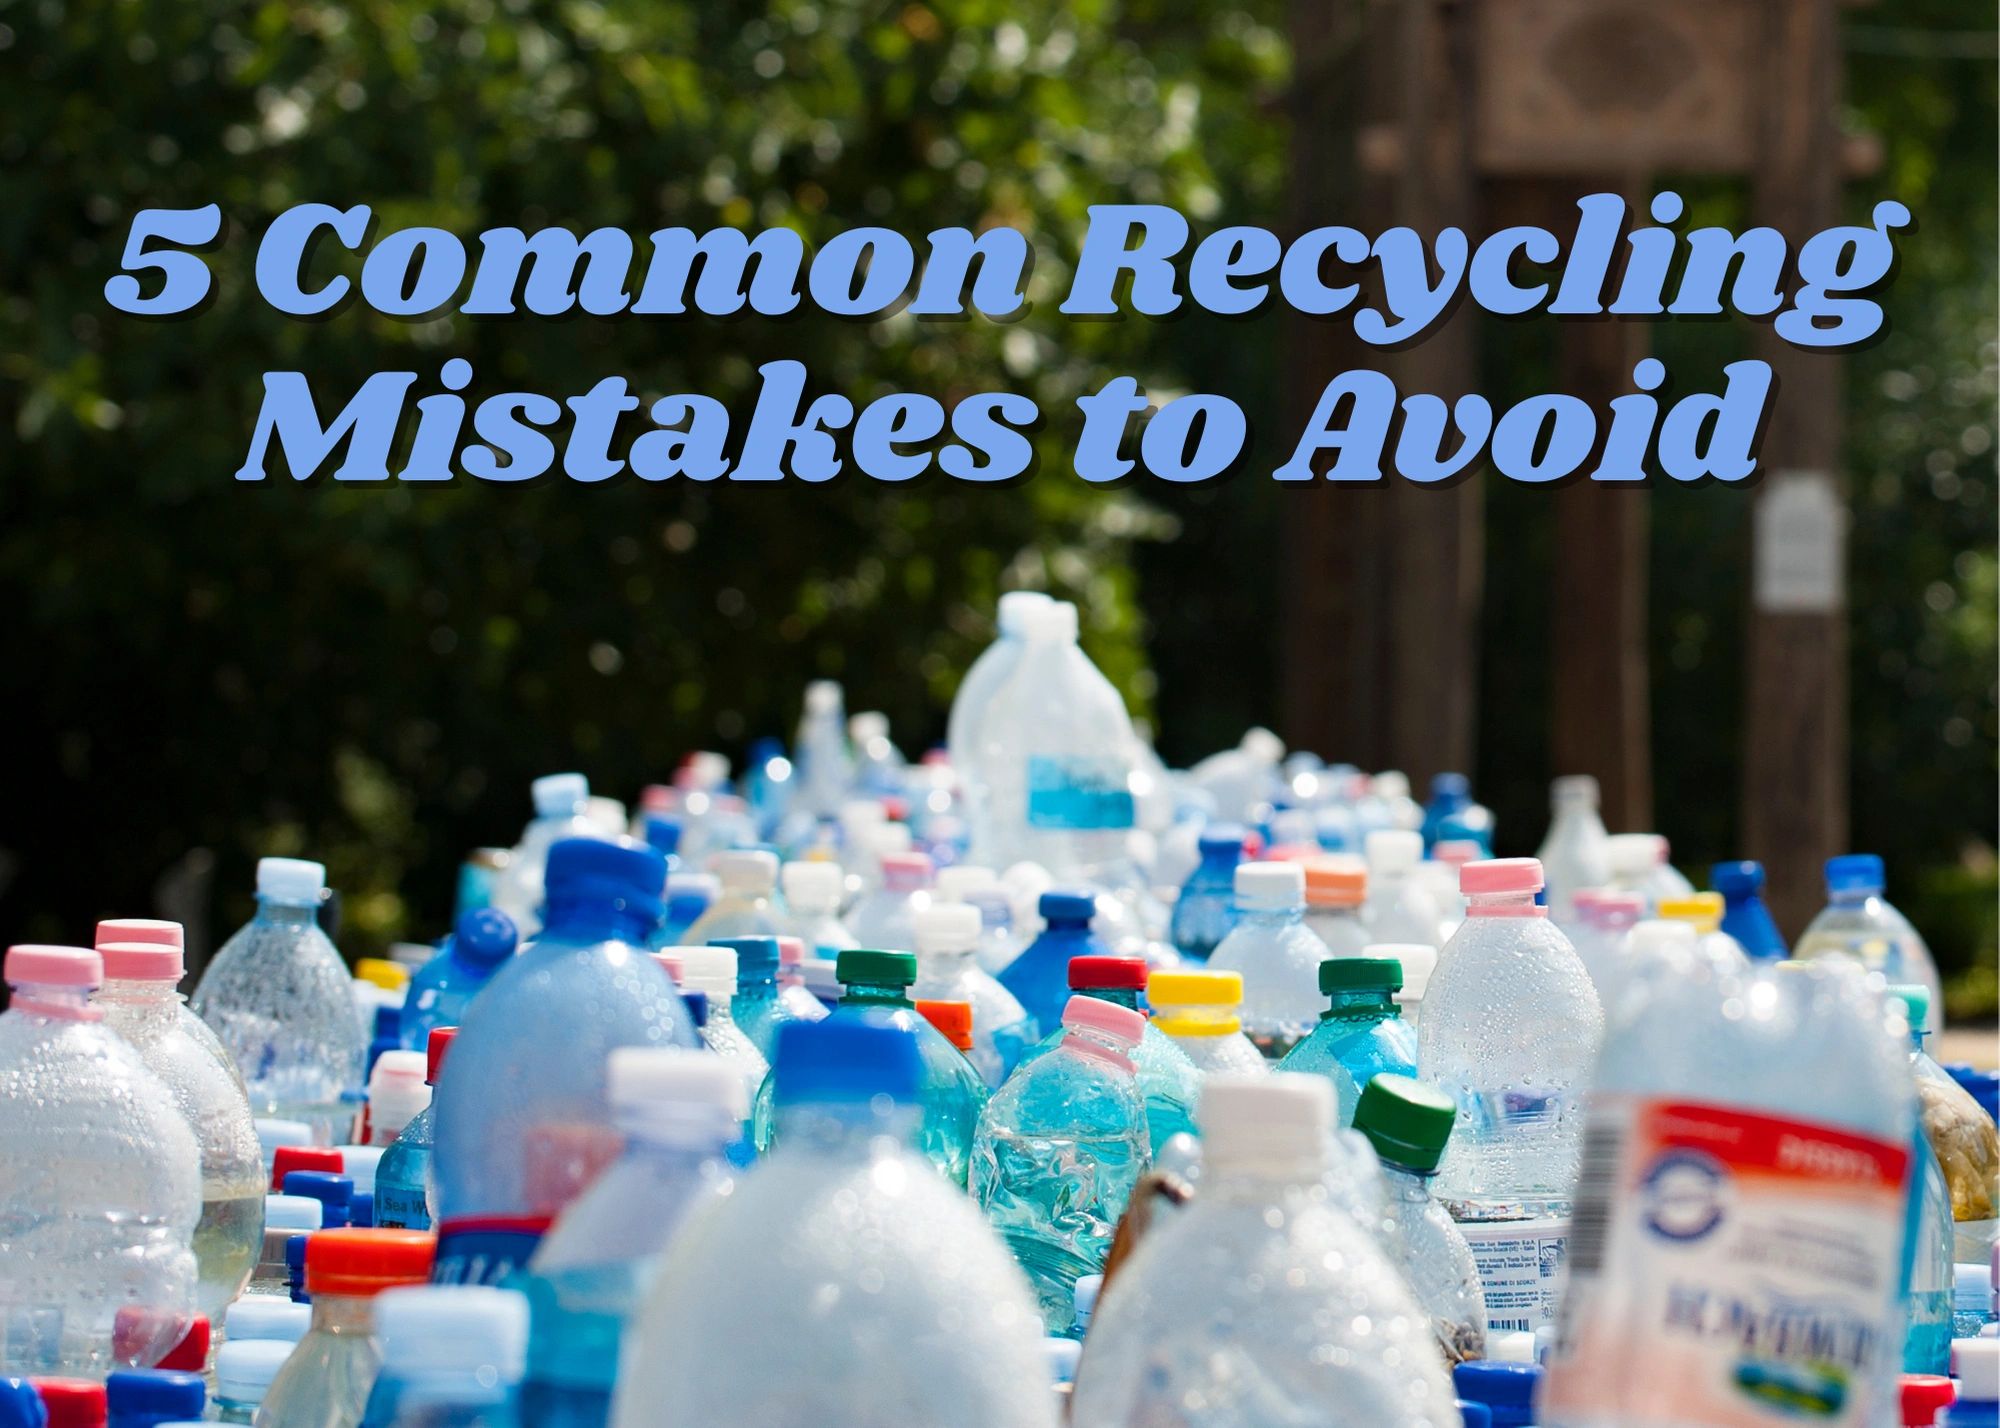 The 5 Most Common Recycling Mistakes, and How to Avoid Them